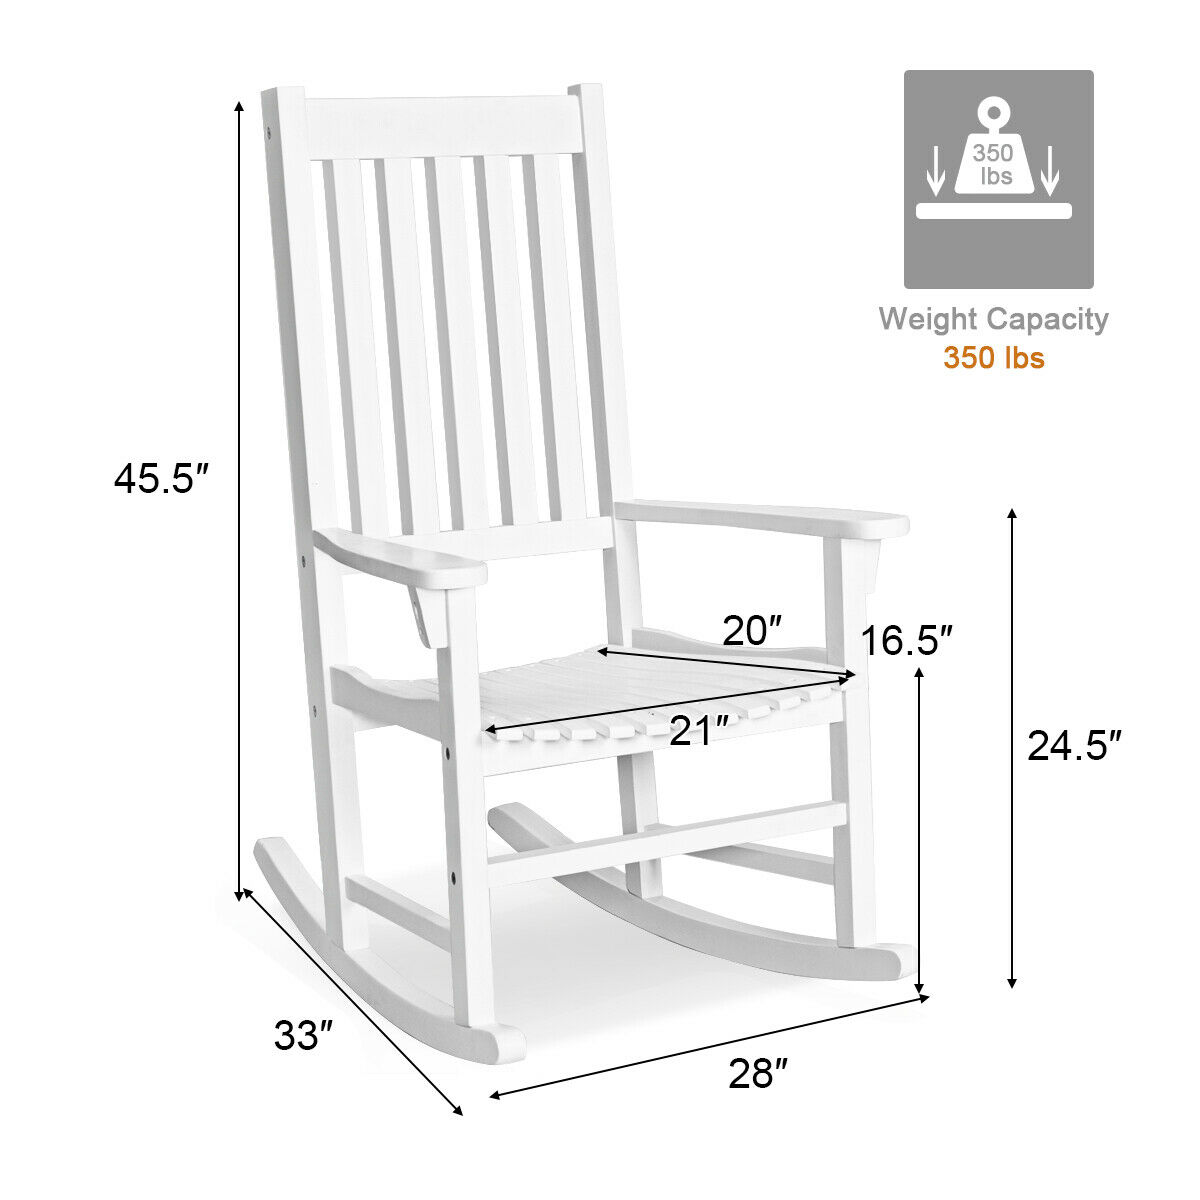 Gymax 2PCS Wood Rocking Chair Porch Rocker High Back Garden Seat Indoor Outdoor White - image 2 of 10